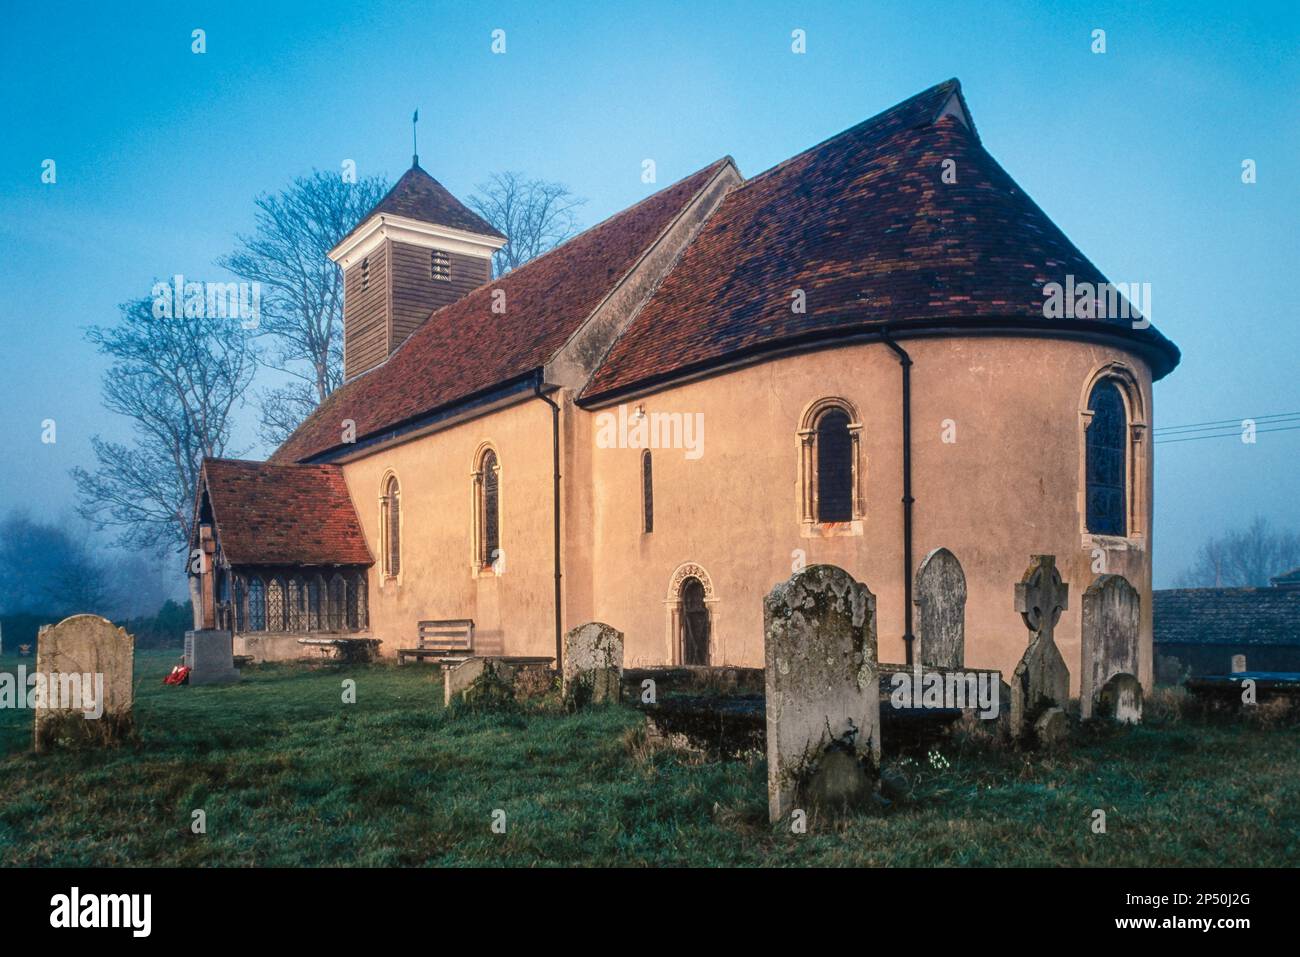 Wissington Church Suffolk, view of the Grade 1 listed 11th Century Church of St Mary Wiston sited in the village of Wissington Suffolk, England Stock Photo